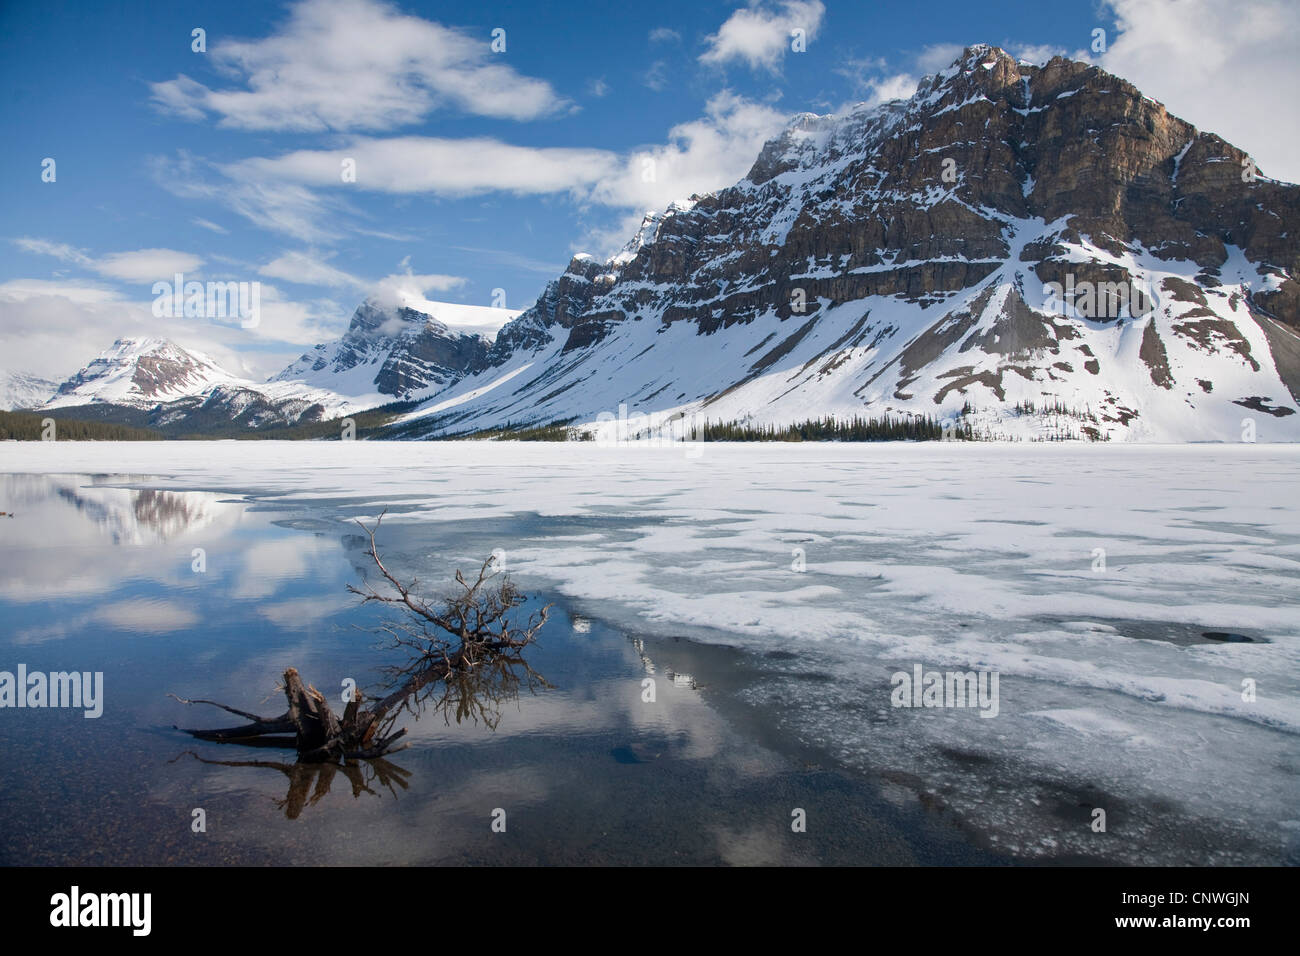 partly frozen Bow Lake and mountain scenery, Canada, Alberta, Banff National Park Stock Photo